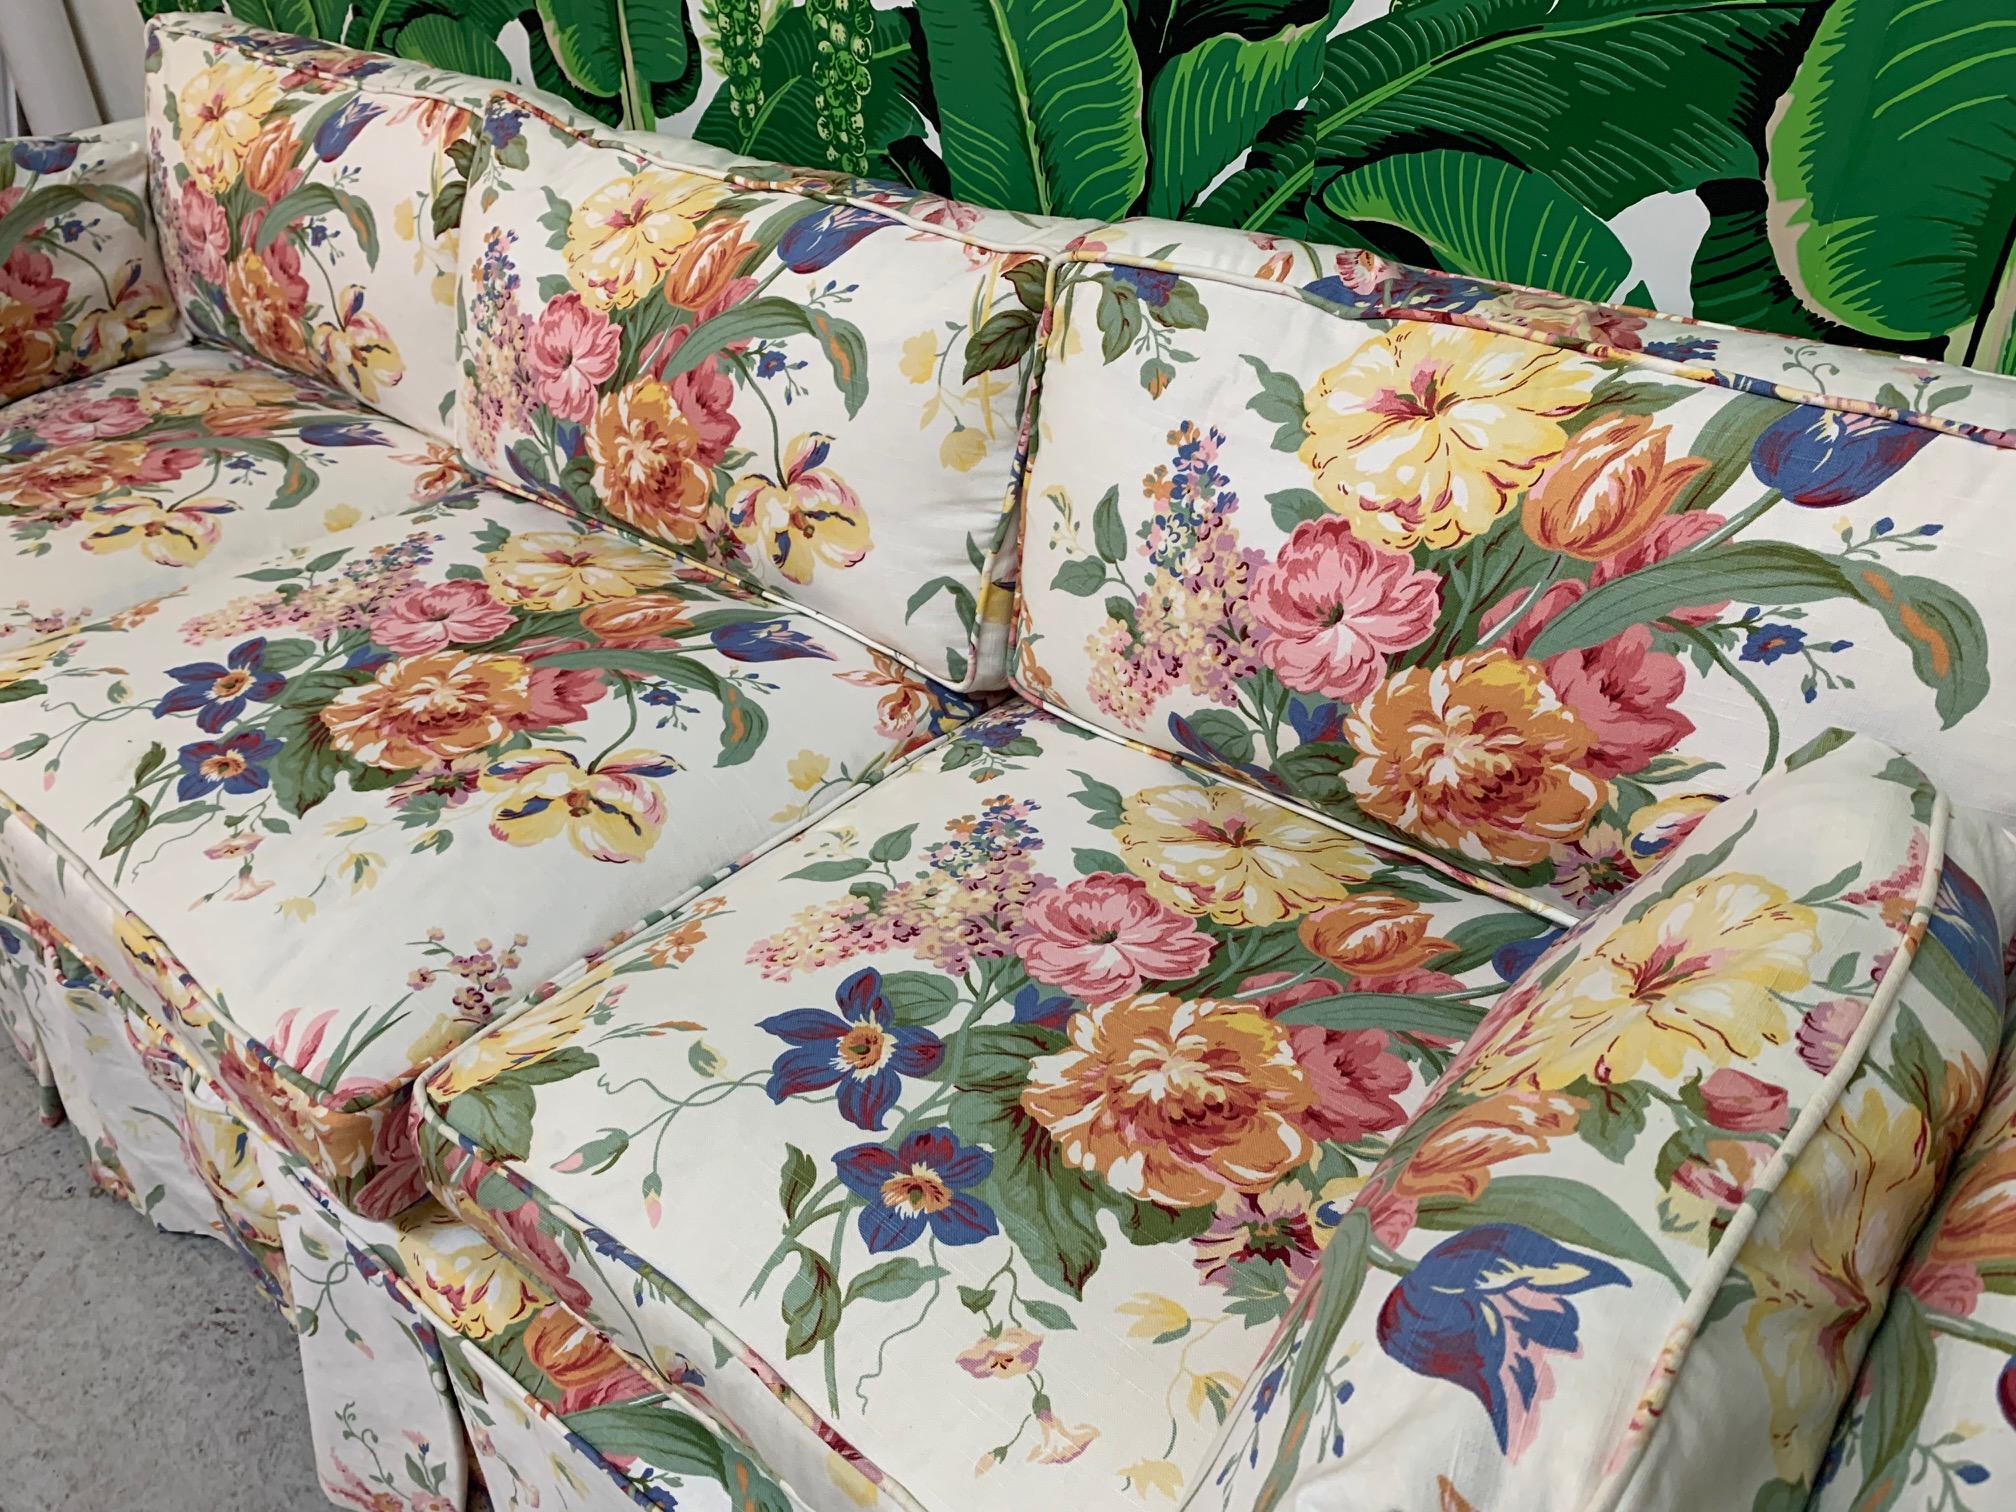 Vintage midcentury sofa by Henredon features slip cover in a Ralph Lauren floral print. Down-filled spring cushions can be unzipped for easy cleaning, and main cover is also easily removed. Great vintage condition with only very minor imperfections